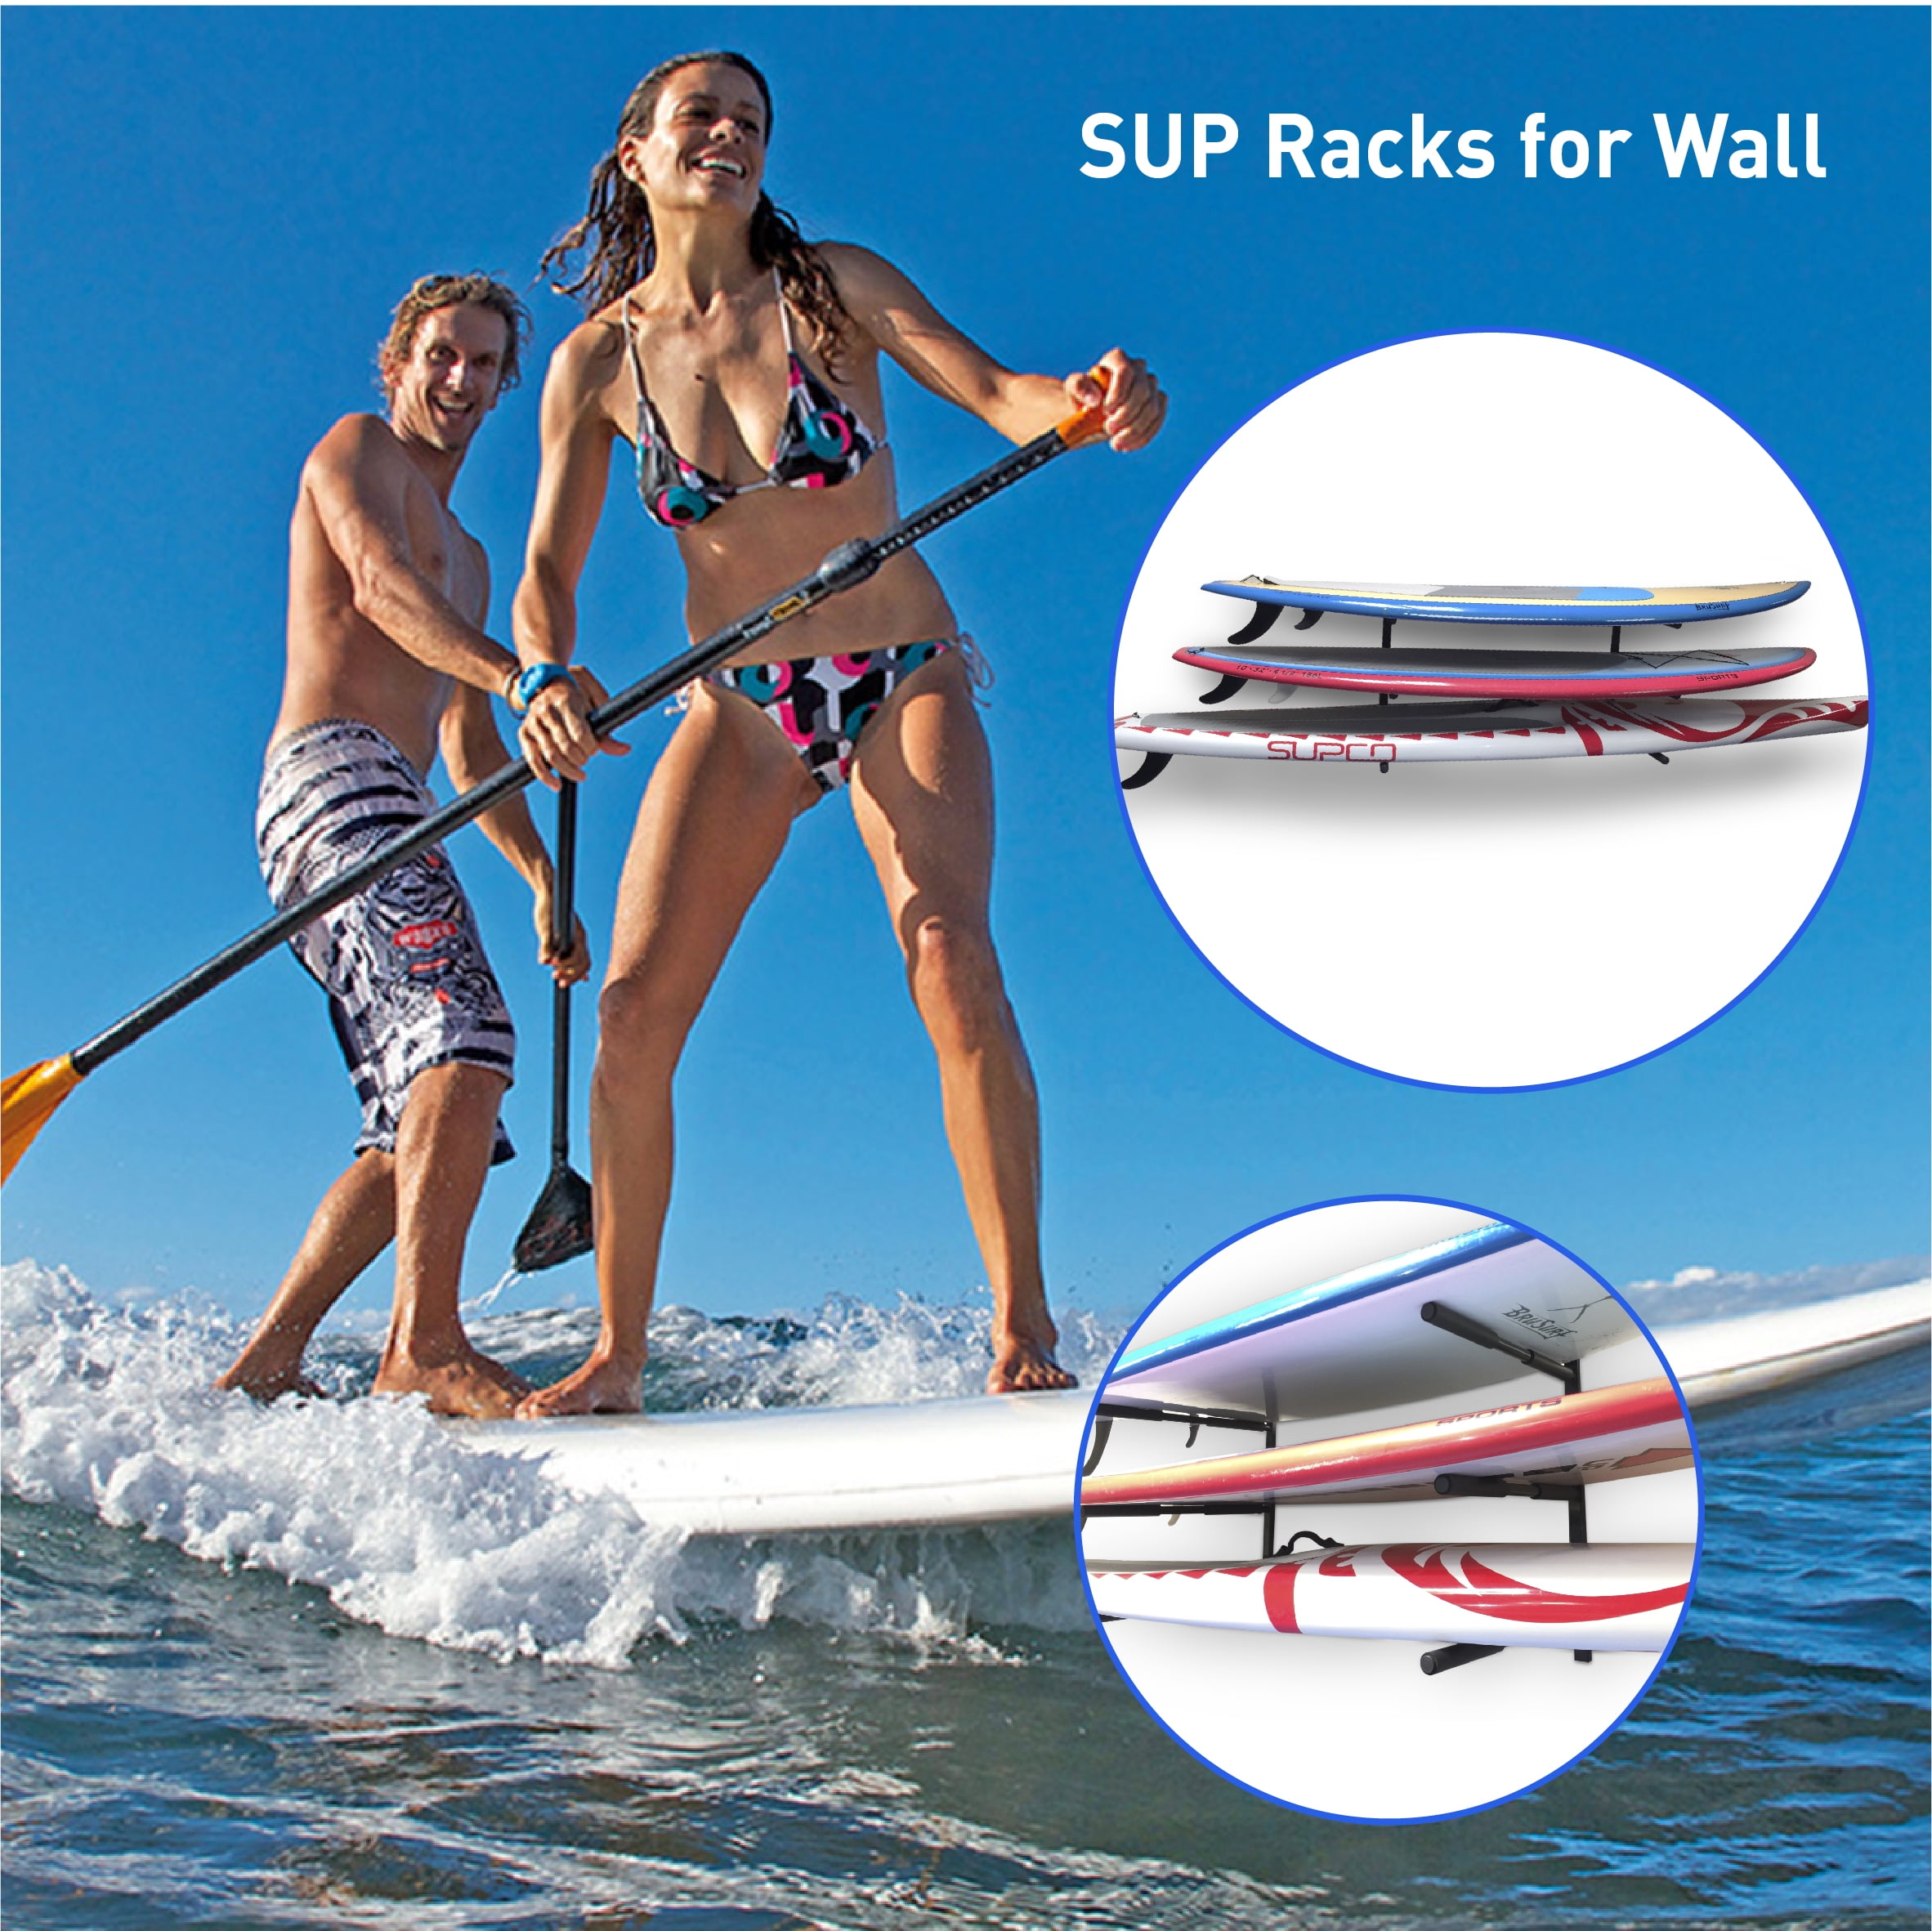 EasyGoProducts EGP-SURF-006 SUP and Surf 3 Level Wall Storage for Garage or Room-Paddle Board and Longboard Racks 